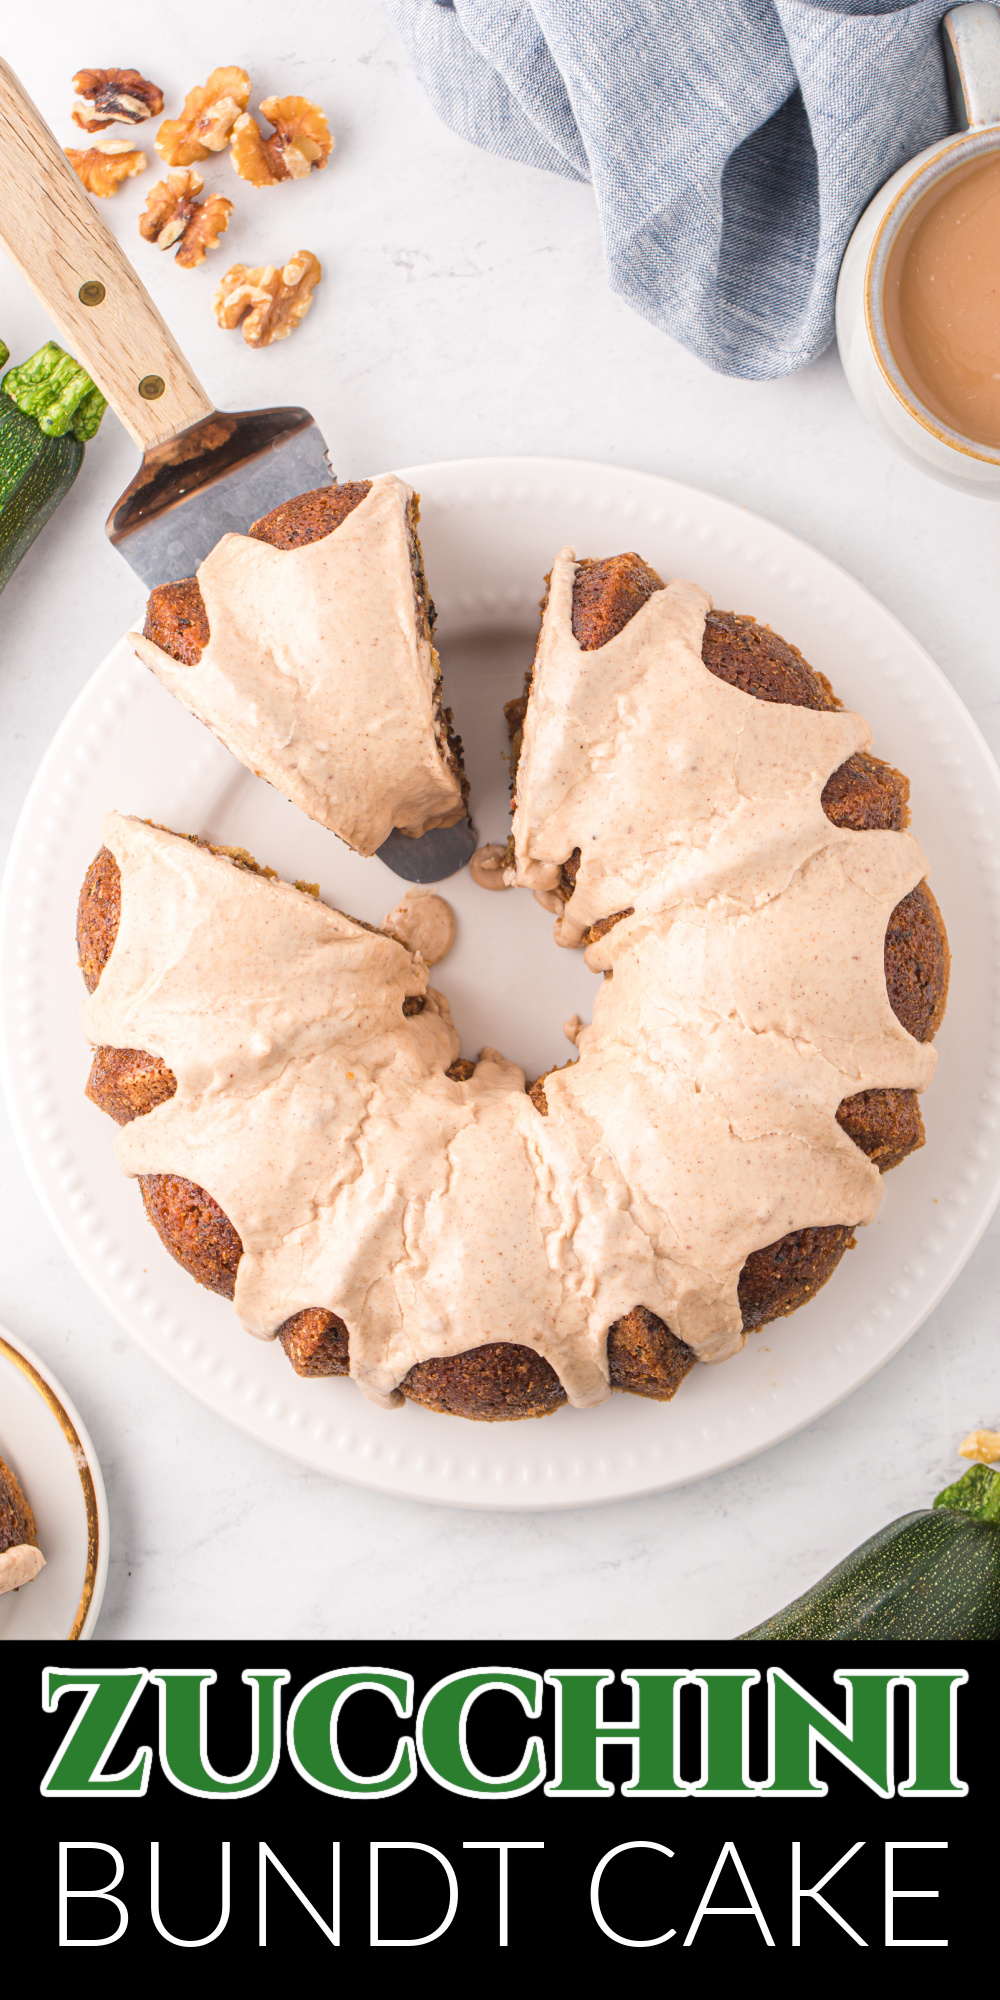 If you enjoy an excellent bunt cake, you will love this Zucchini bundt cake with cinnamon icing! This deliciously sweet dessert is the perfect recipe to satisfy your sweet tooth. A delicious bundt cake made with freshly shredded zucchini, chopped walnuts, ground cinnamon, and more.